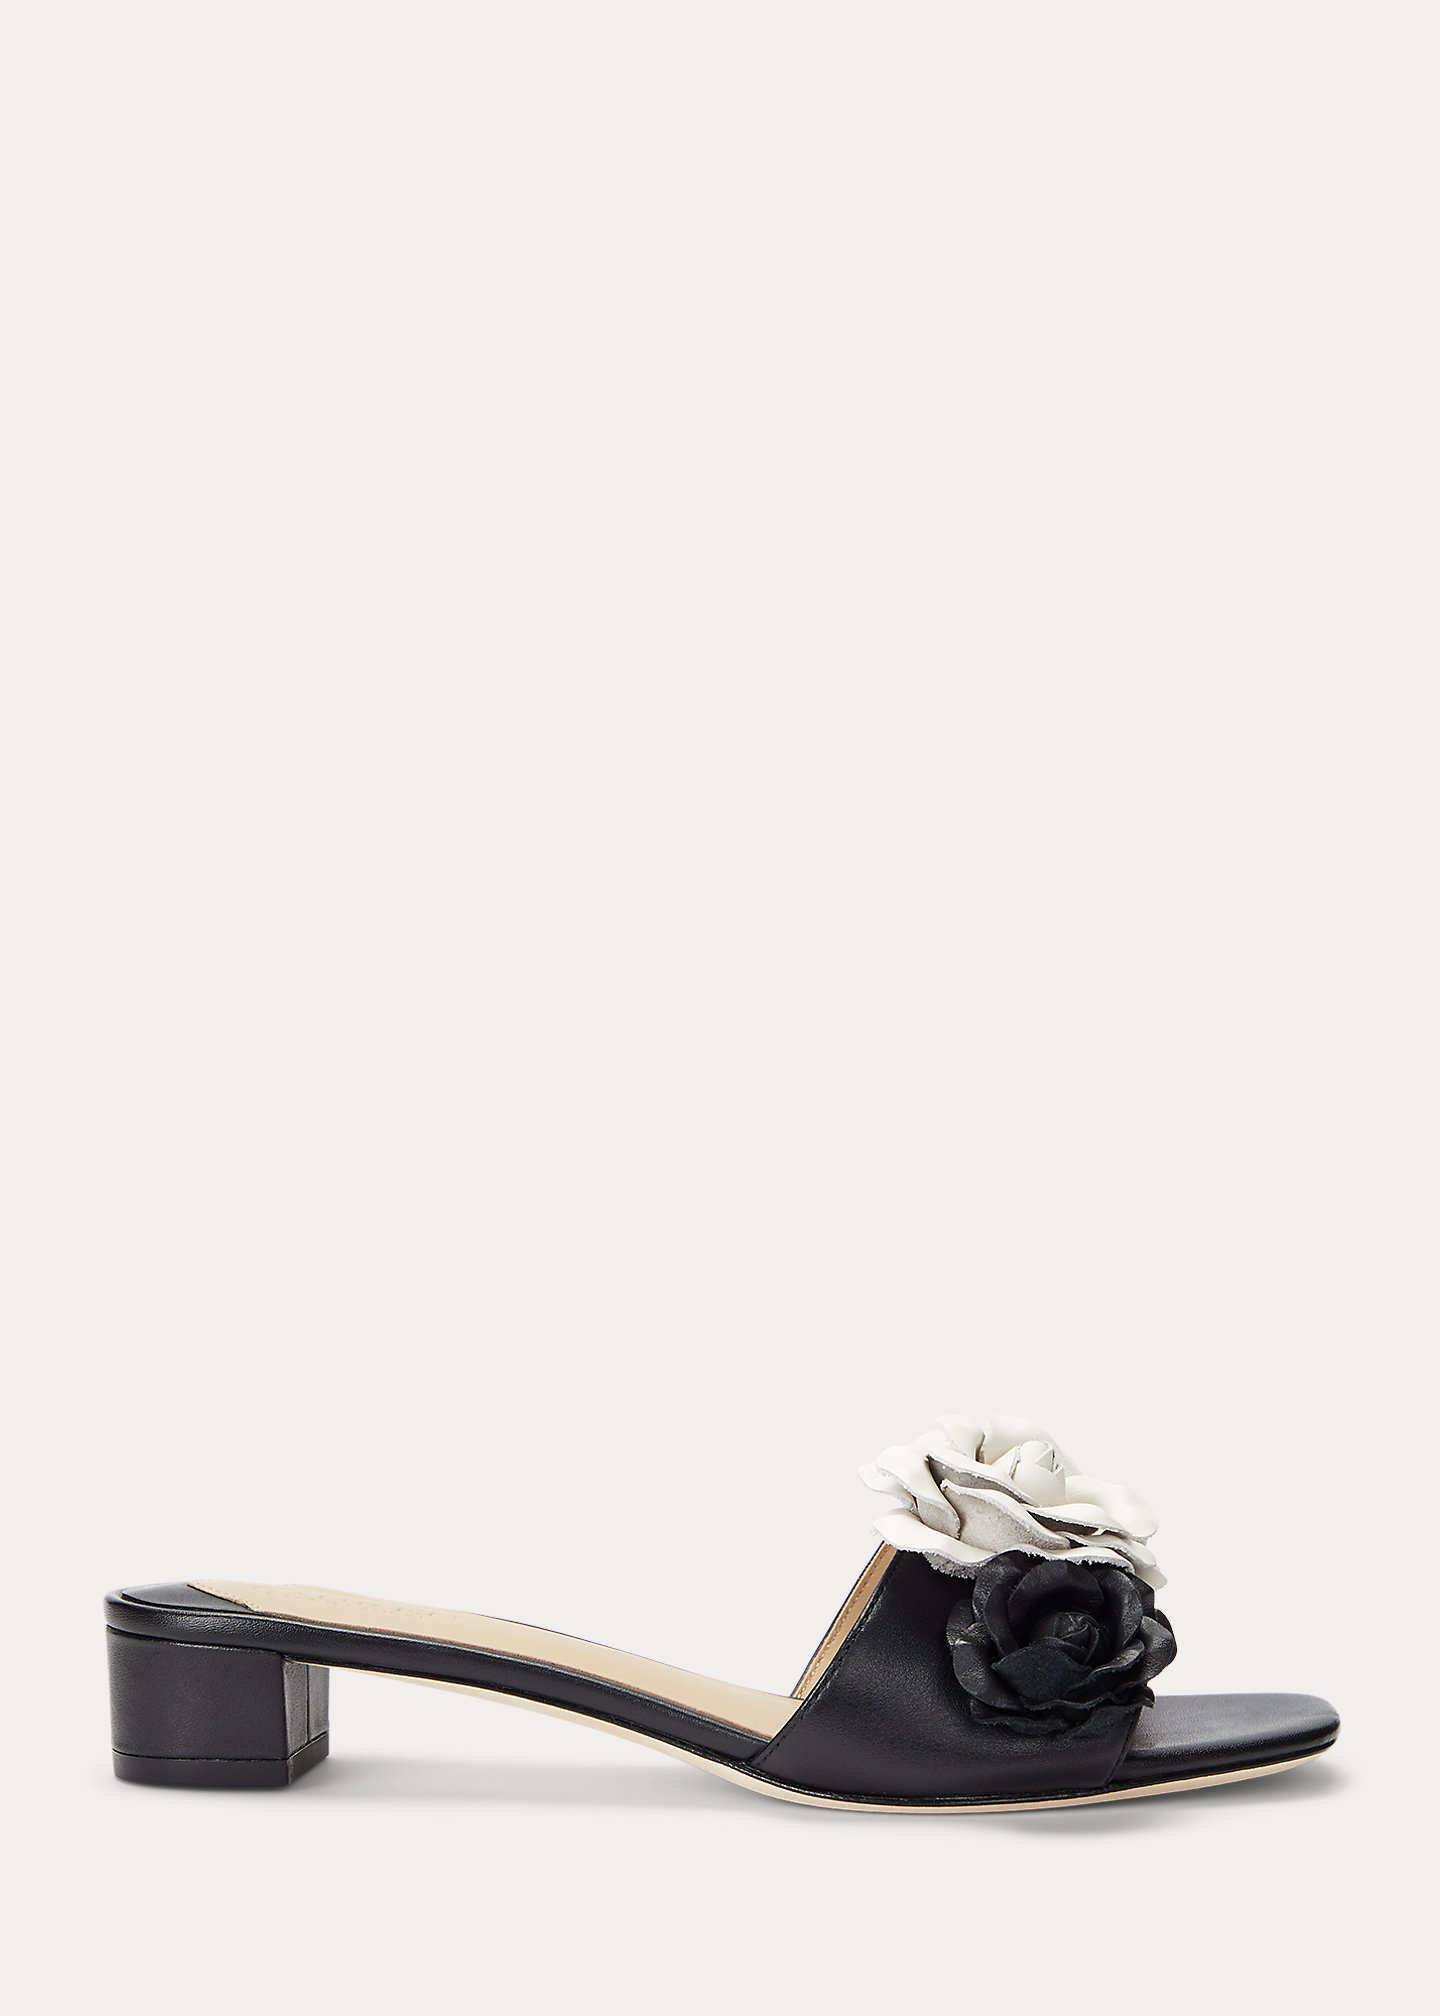 Fay Floral-Trim Nappa Leather Sandal